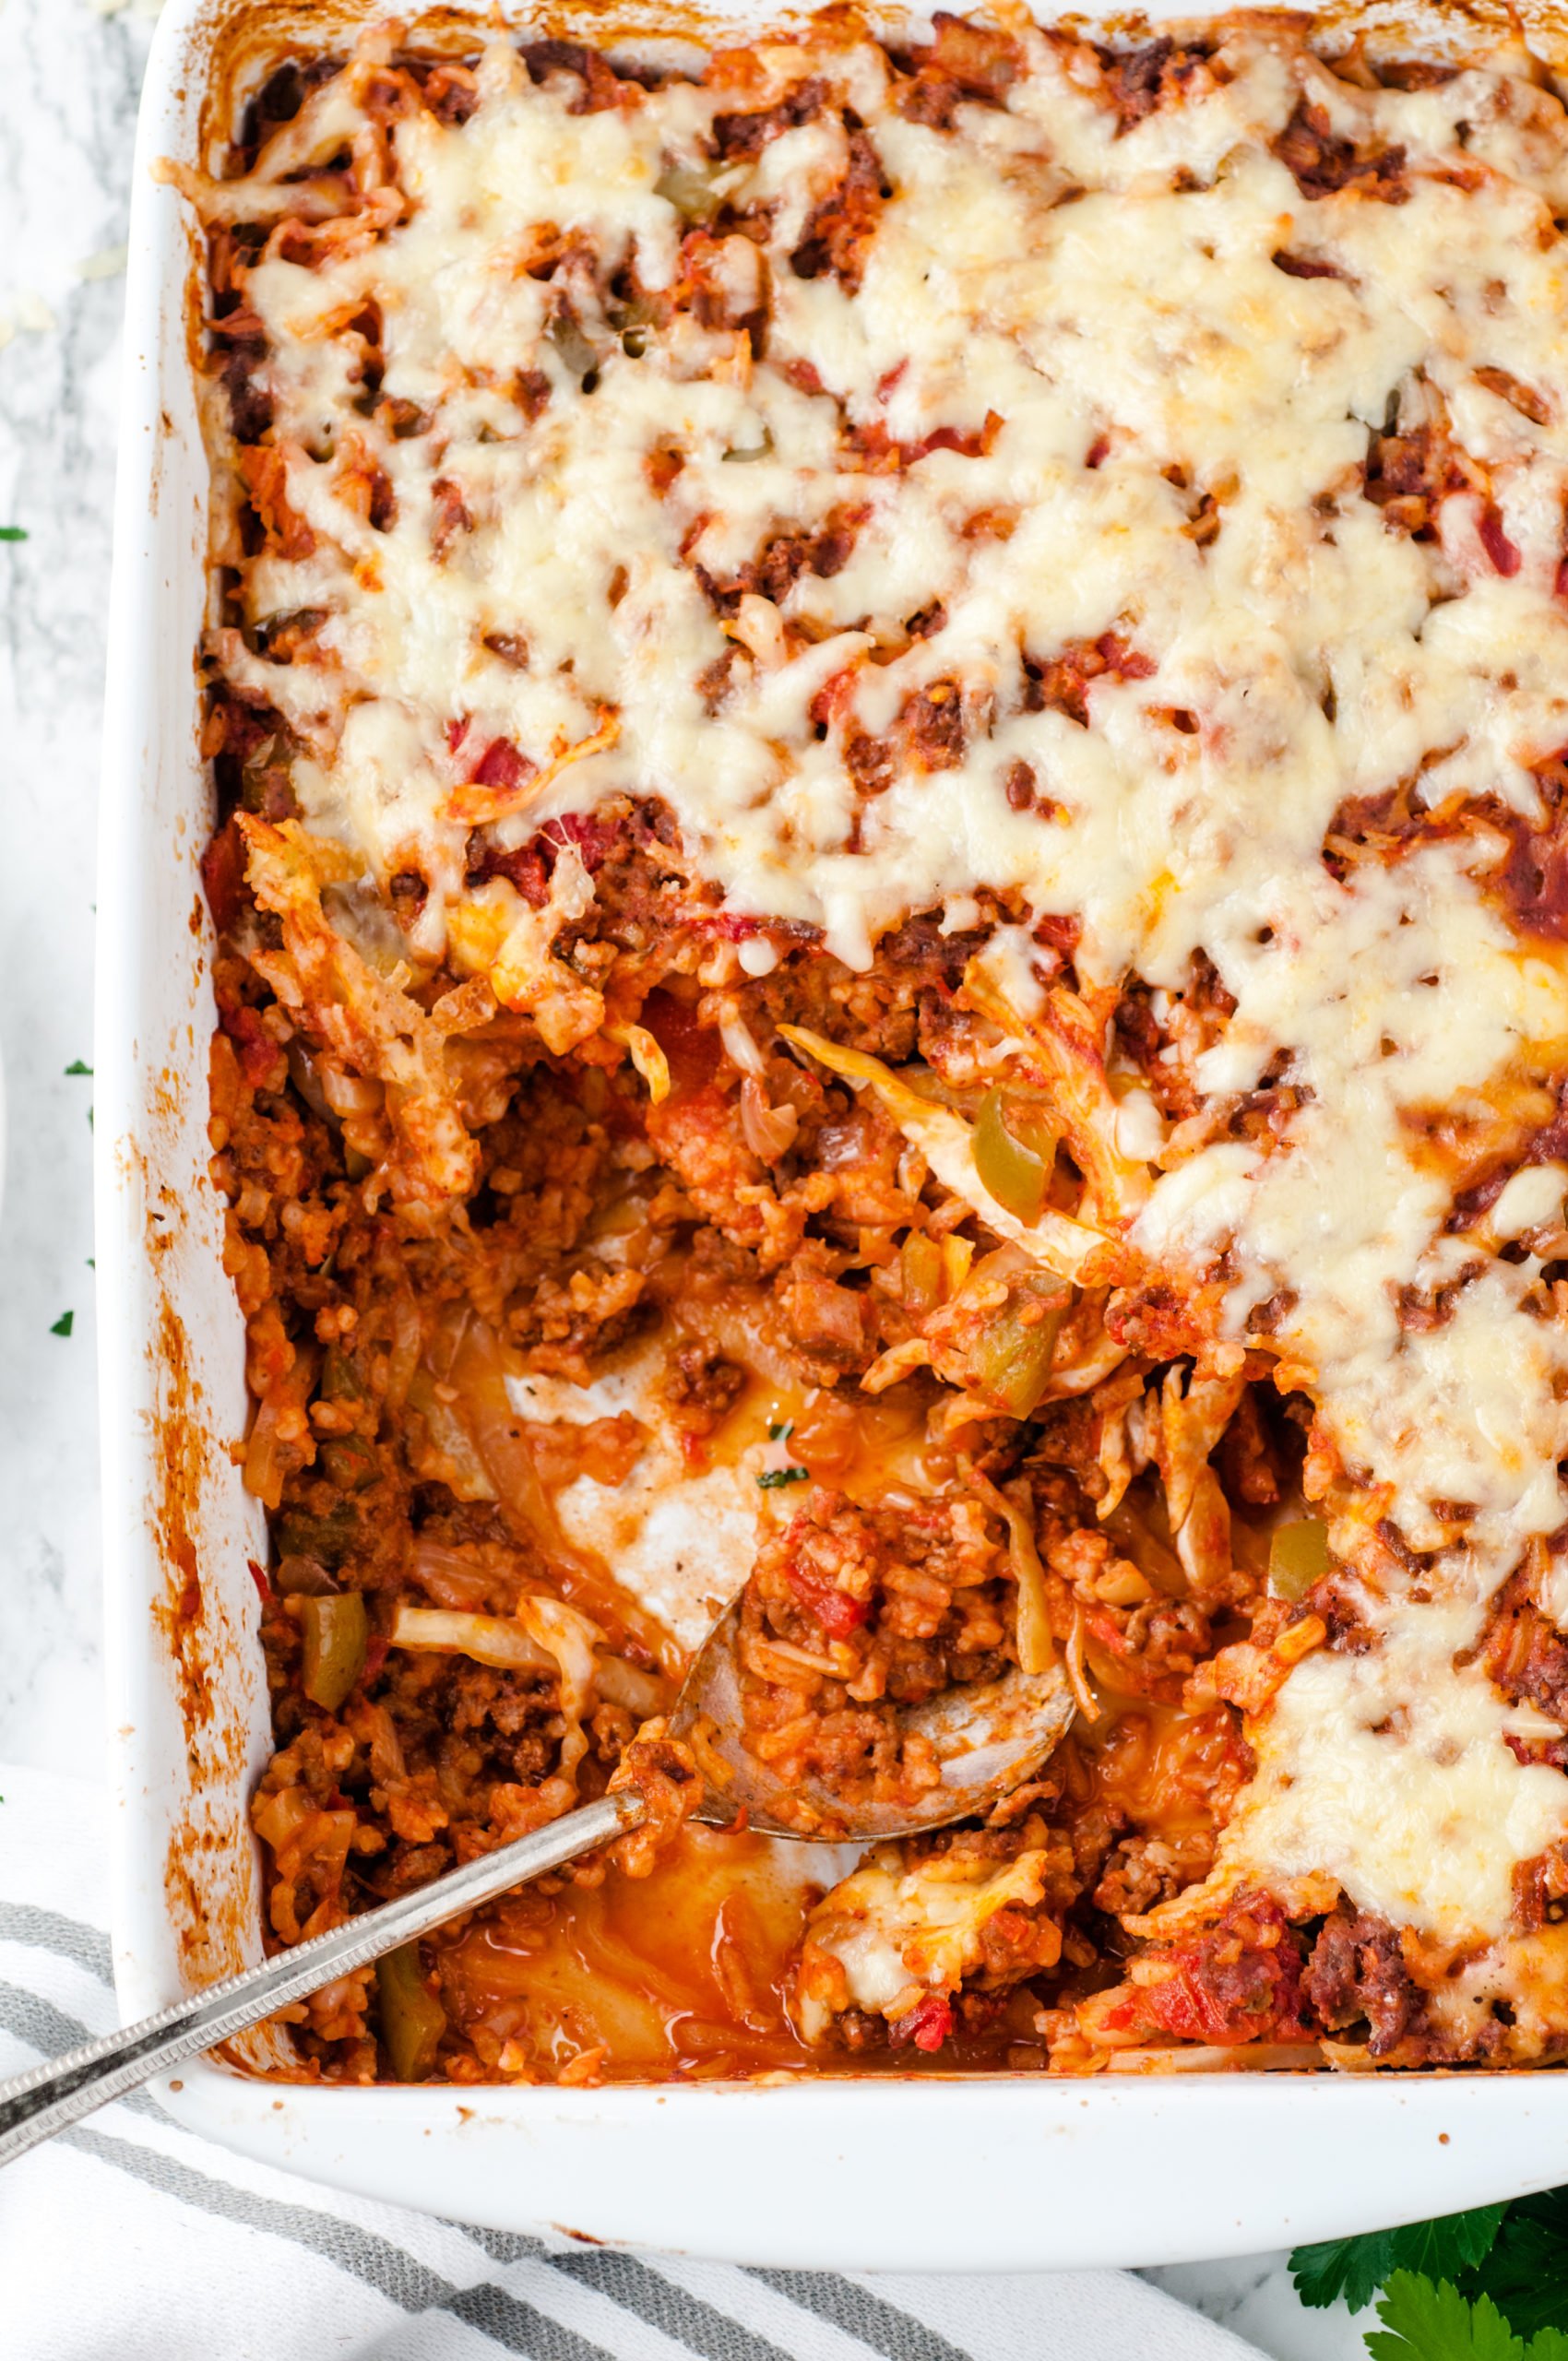 Cabbage Roll Casserole Recipe from Family Fresh Meals  #cabbage #cabbageroll #beef #groundbeef #casserole #lowcarb via @familyfresh